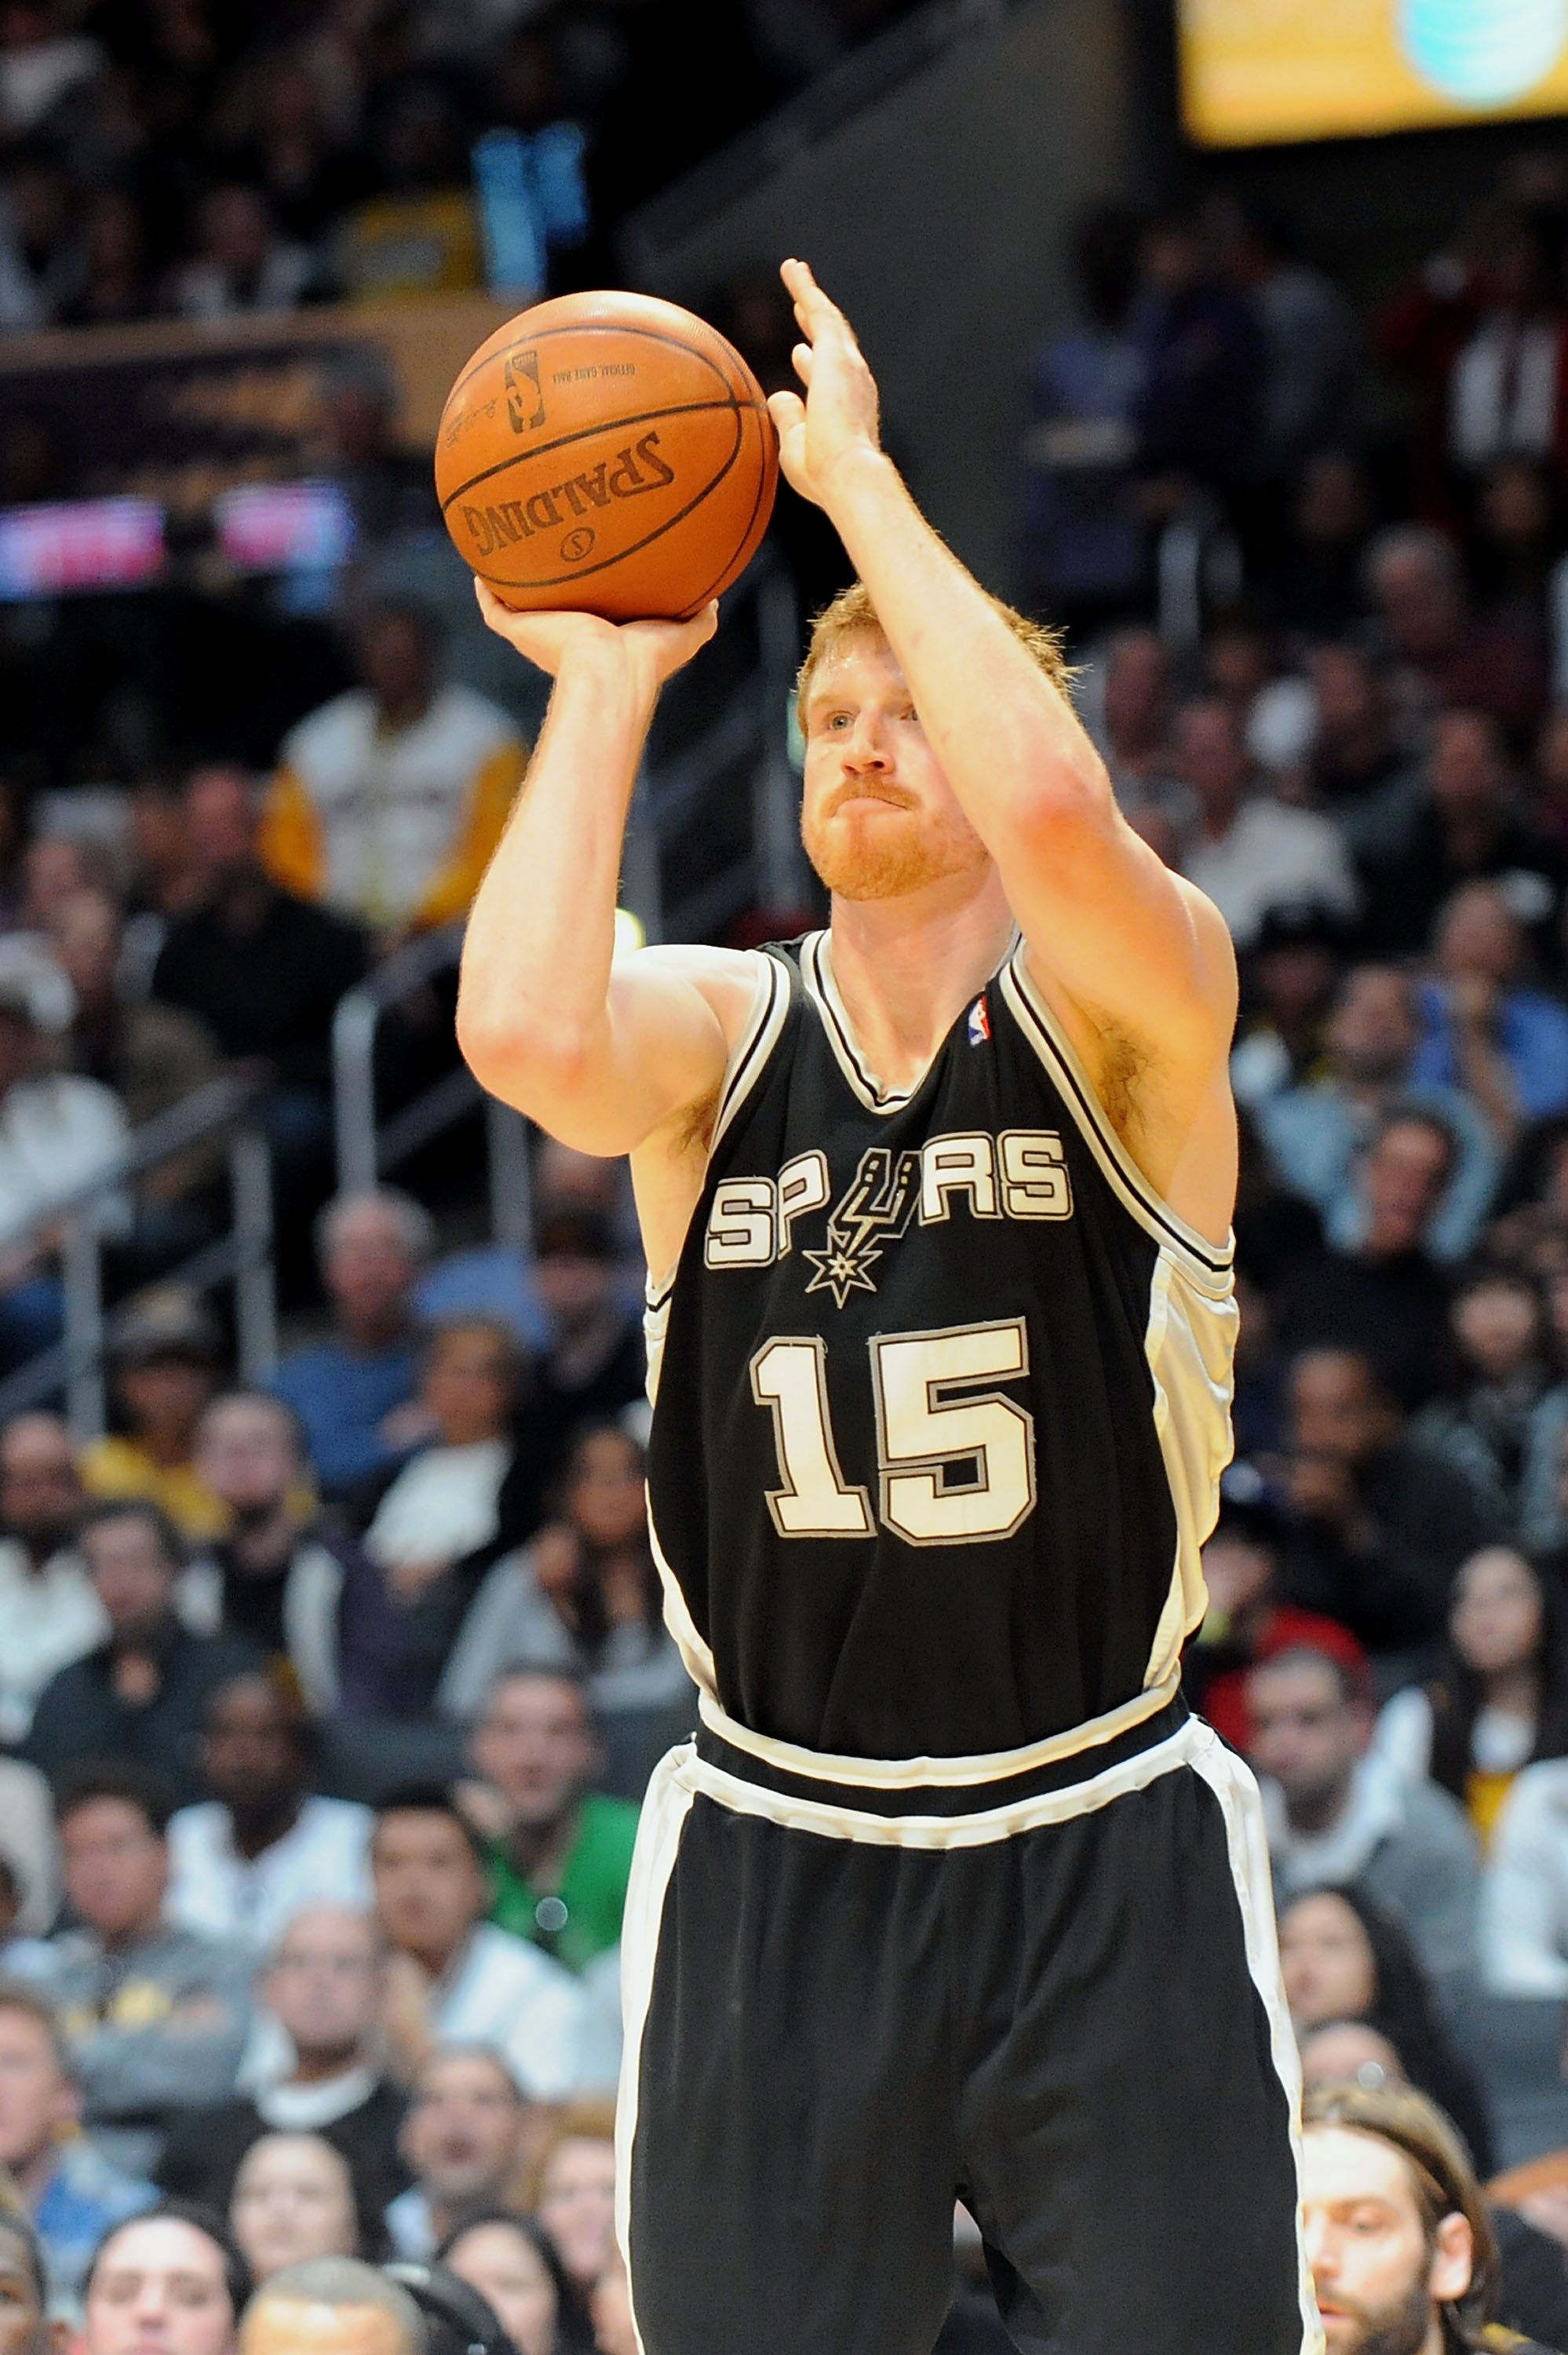 LOS ANGELES, CA - JANUARY 25:  Matt Bonner #15 of the San Antonio Spurs shoots the ball during the game against the Los Angeles Lakers at the Staples Center on January 25, 2009 in Los Angeles, California.  The Lakers defeated the Spurs 99-85.  NOTE TO USE